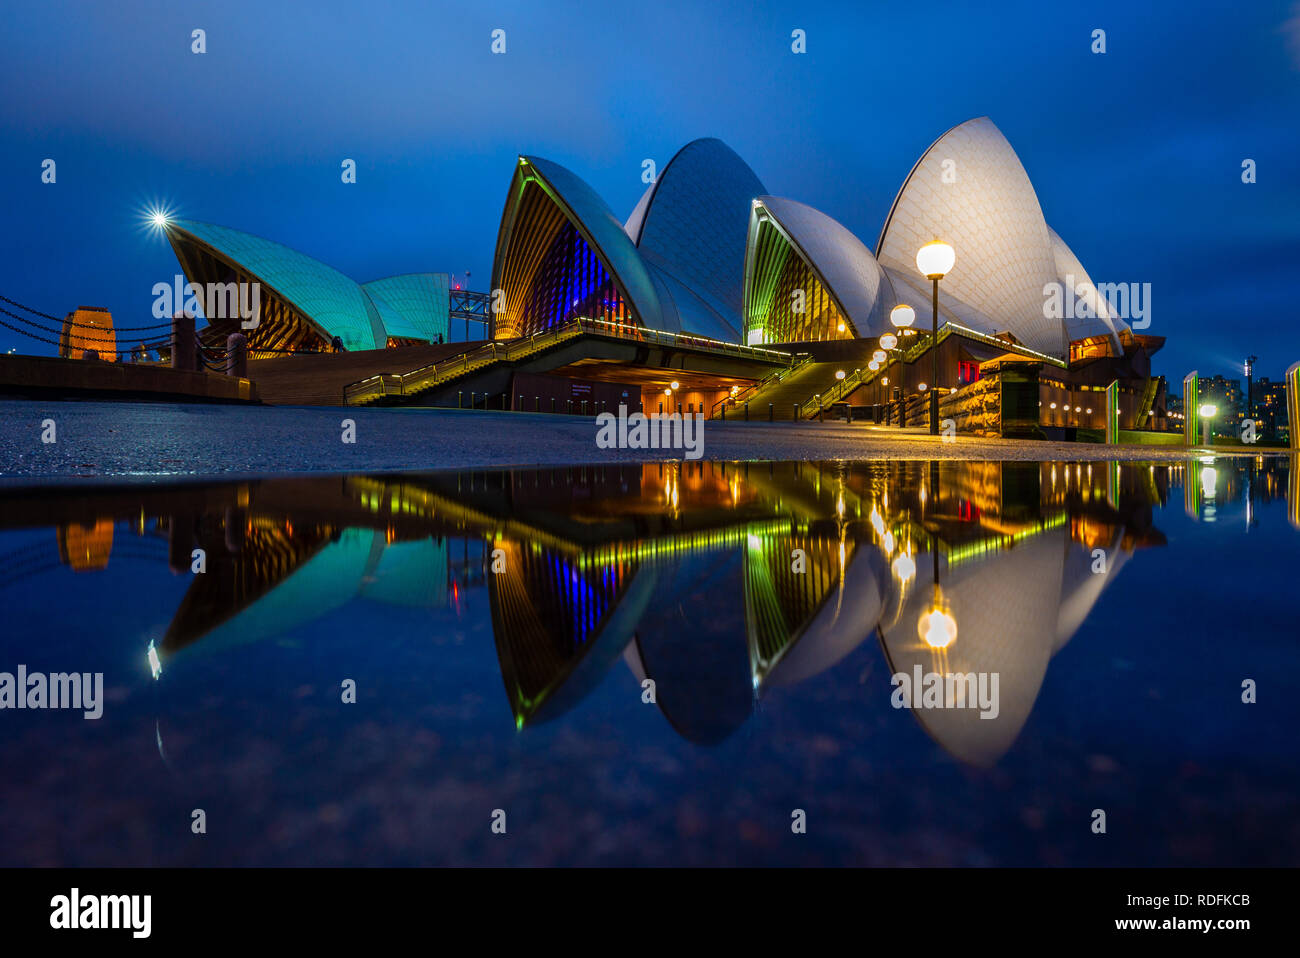 Sydney, Australia - January 6, 2019: mirror image of sydney opera house after a heavy rain in australia. this building is one of the world's most inst Stock Photo